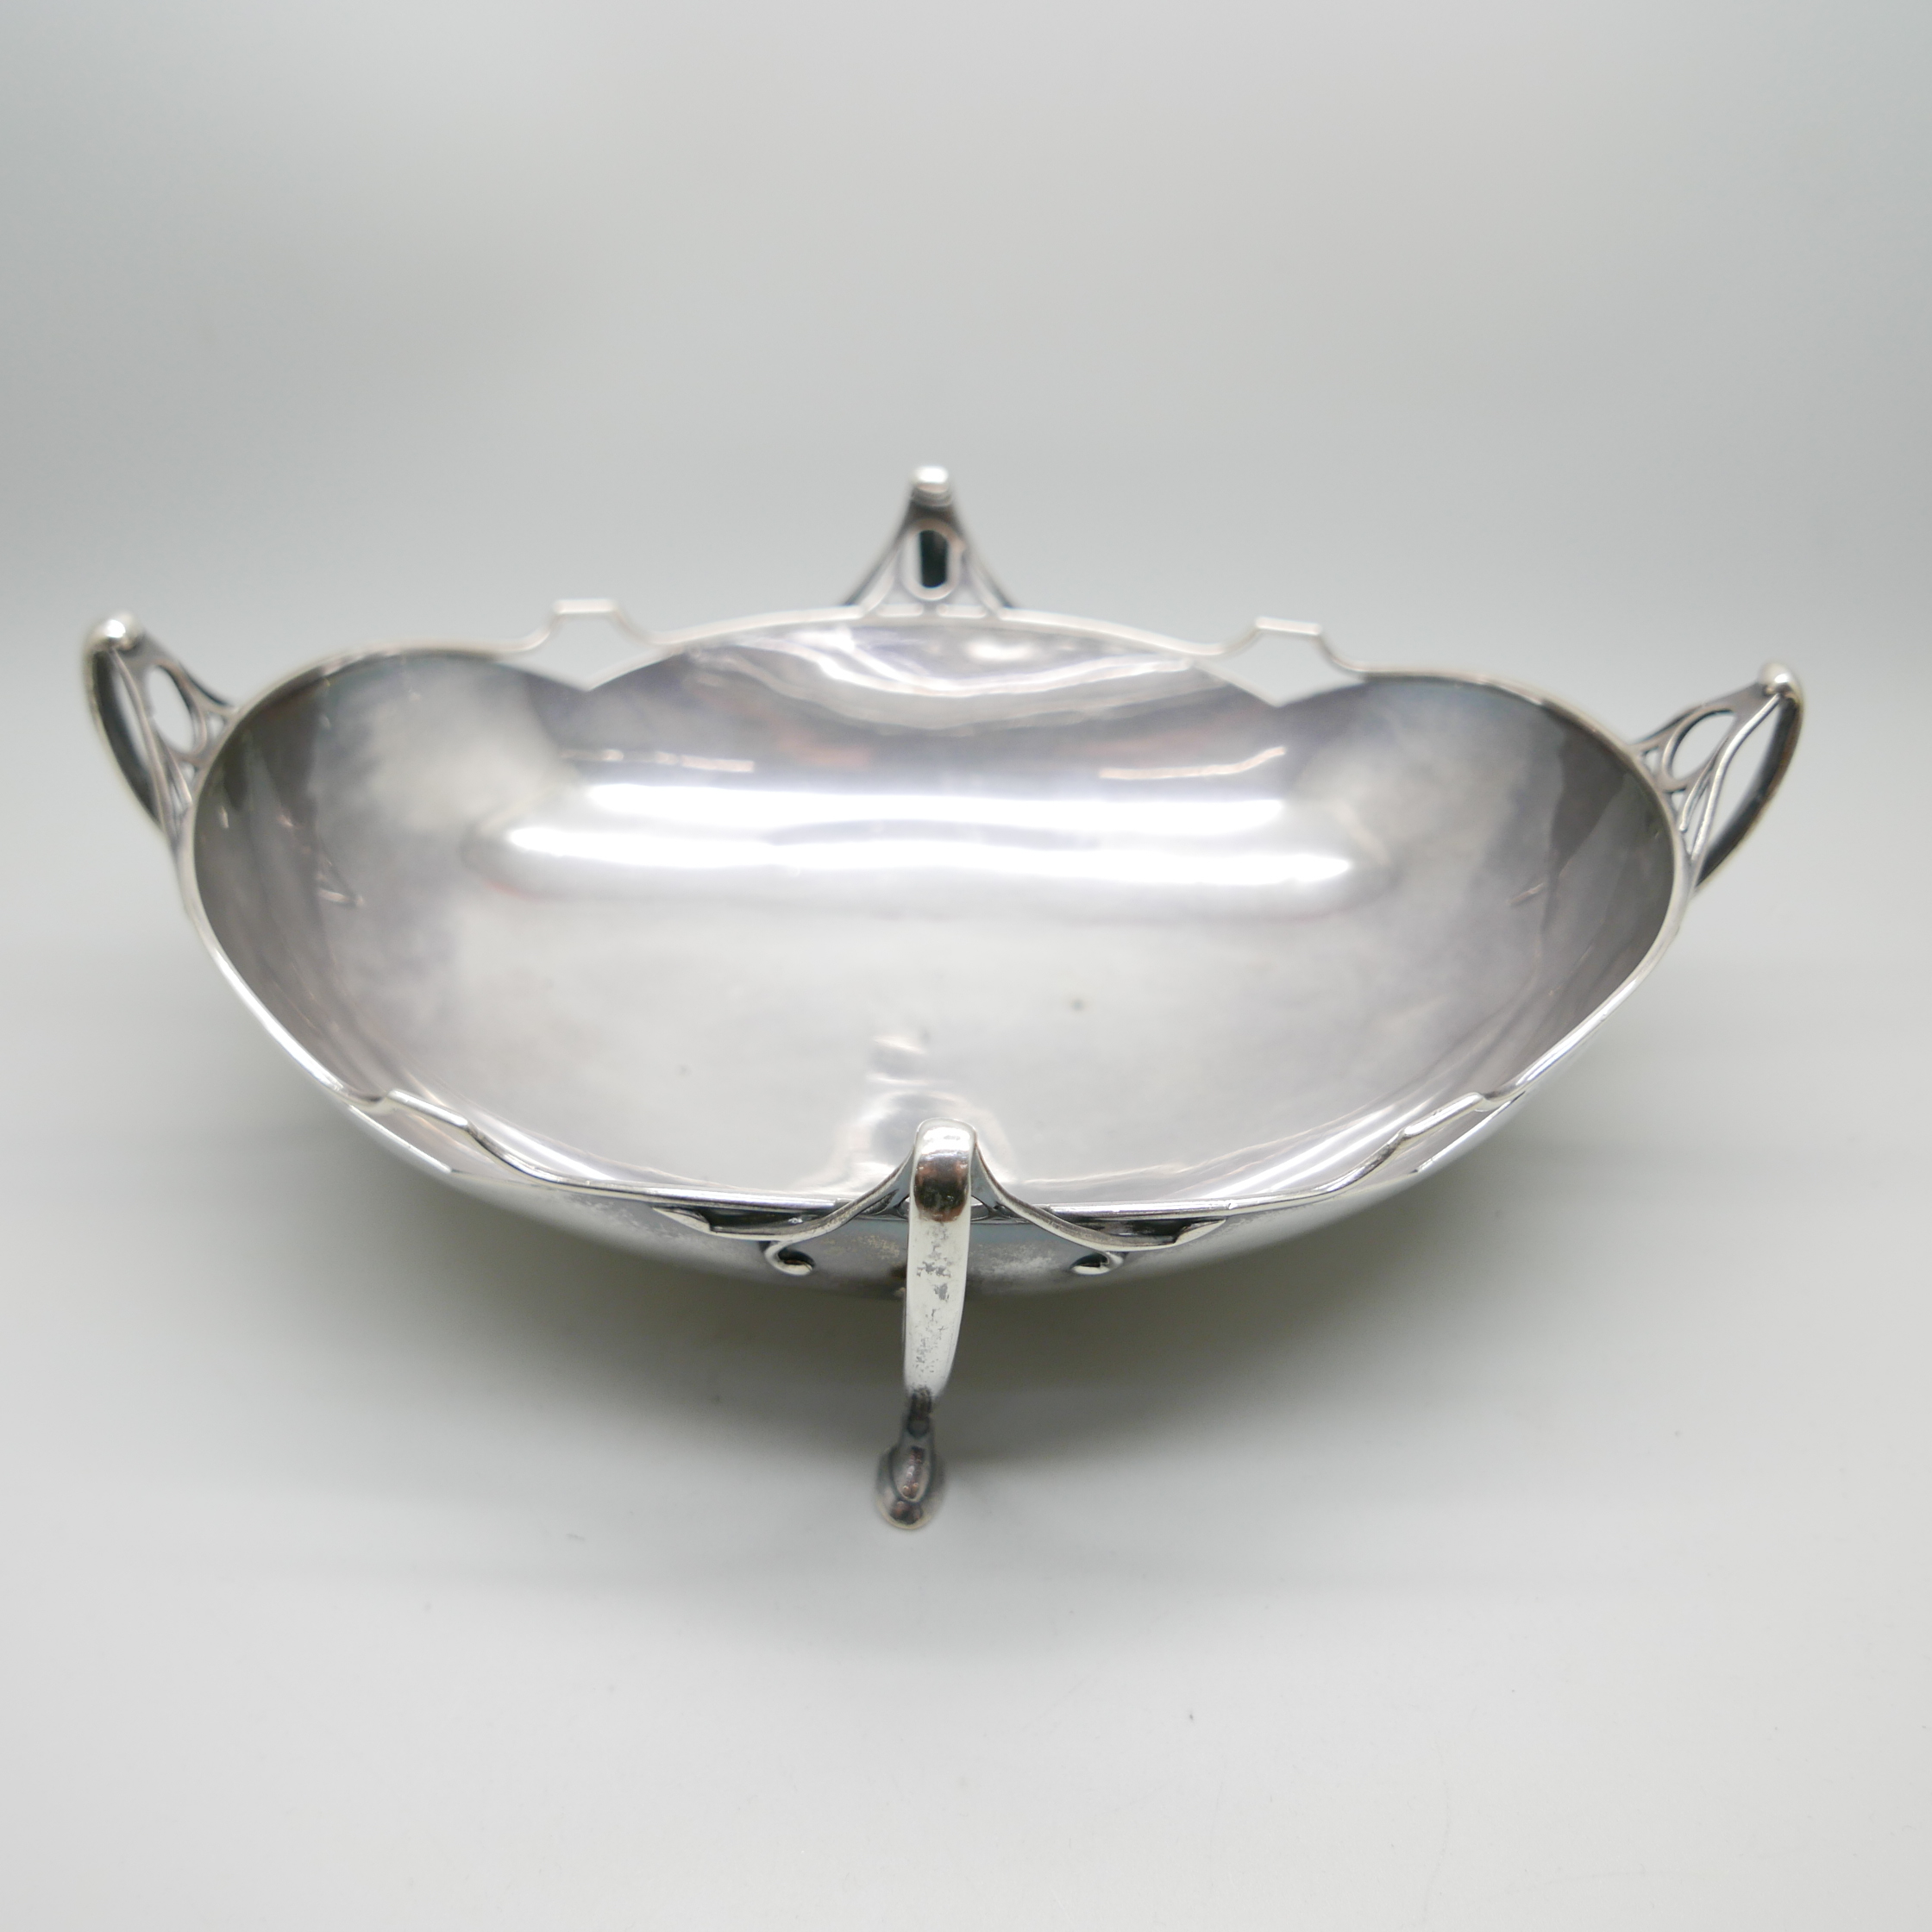 A silver Art Nouveau bowl, Sheffield 1905 by Cooper Brothers & Sons, 430g, 23.5cm wide - Image 2 of 6